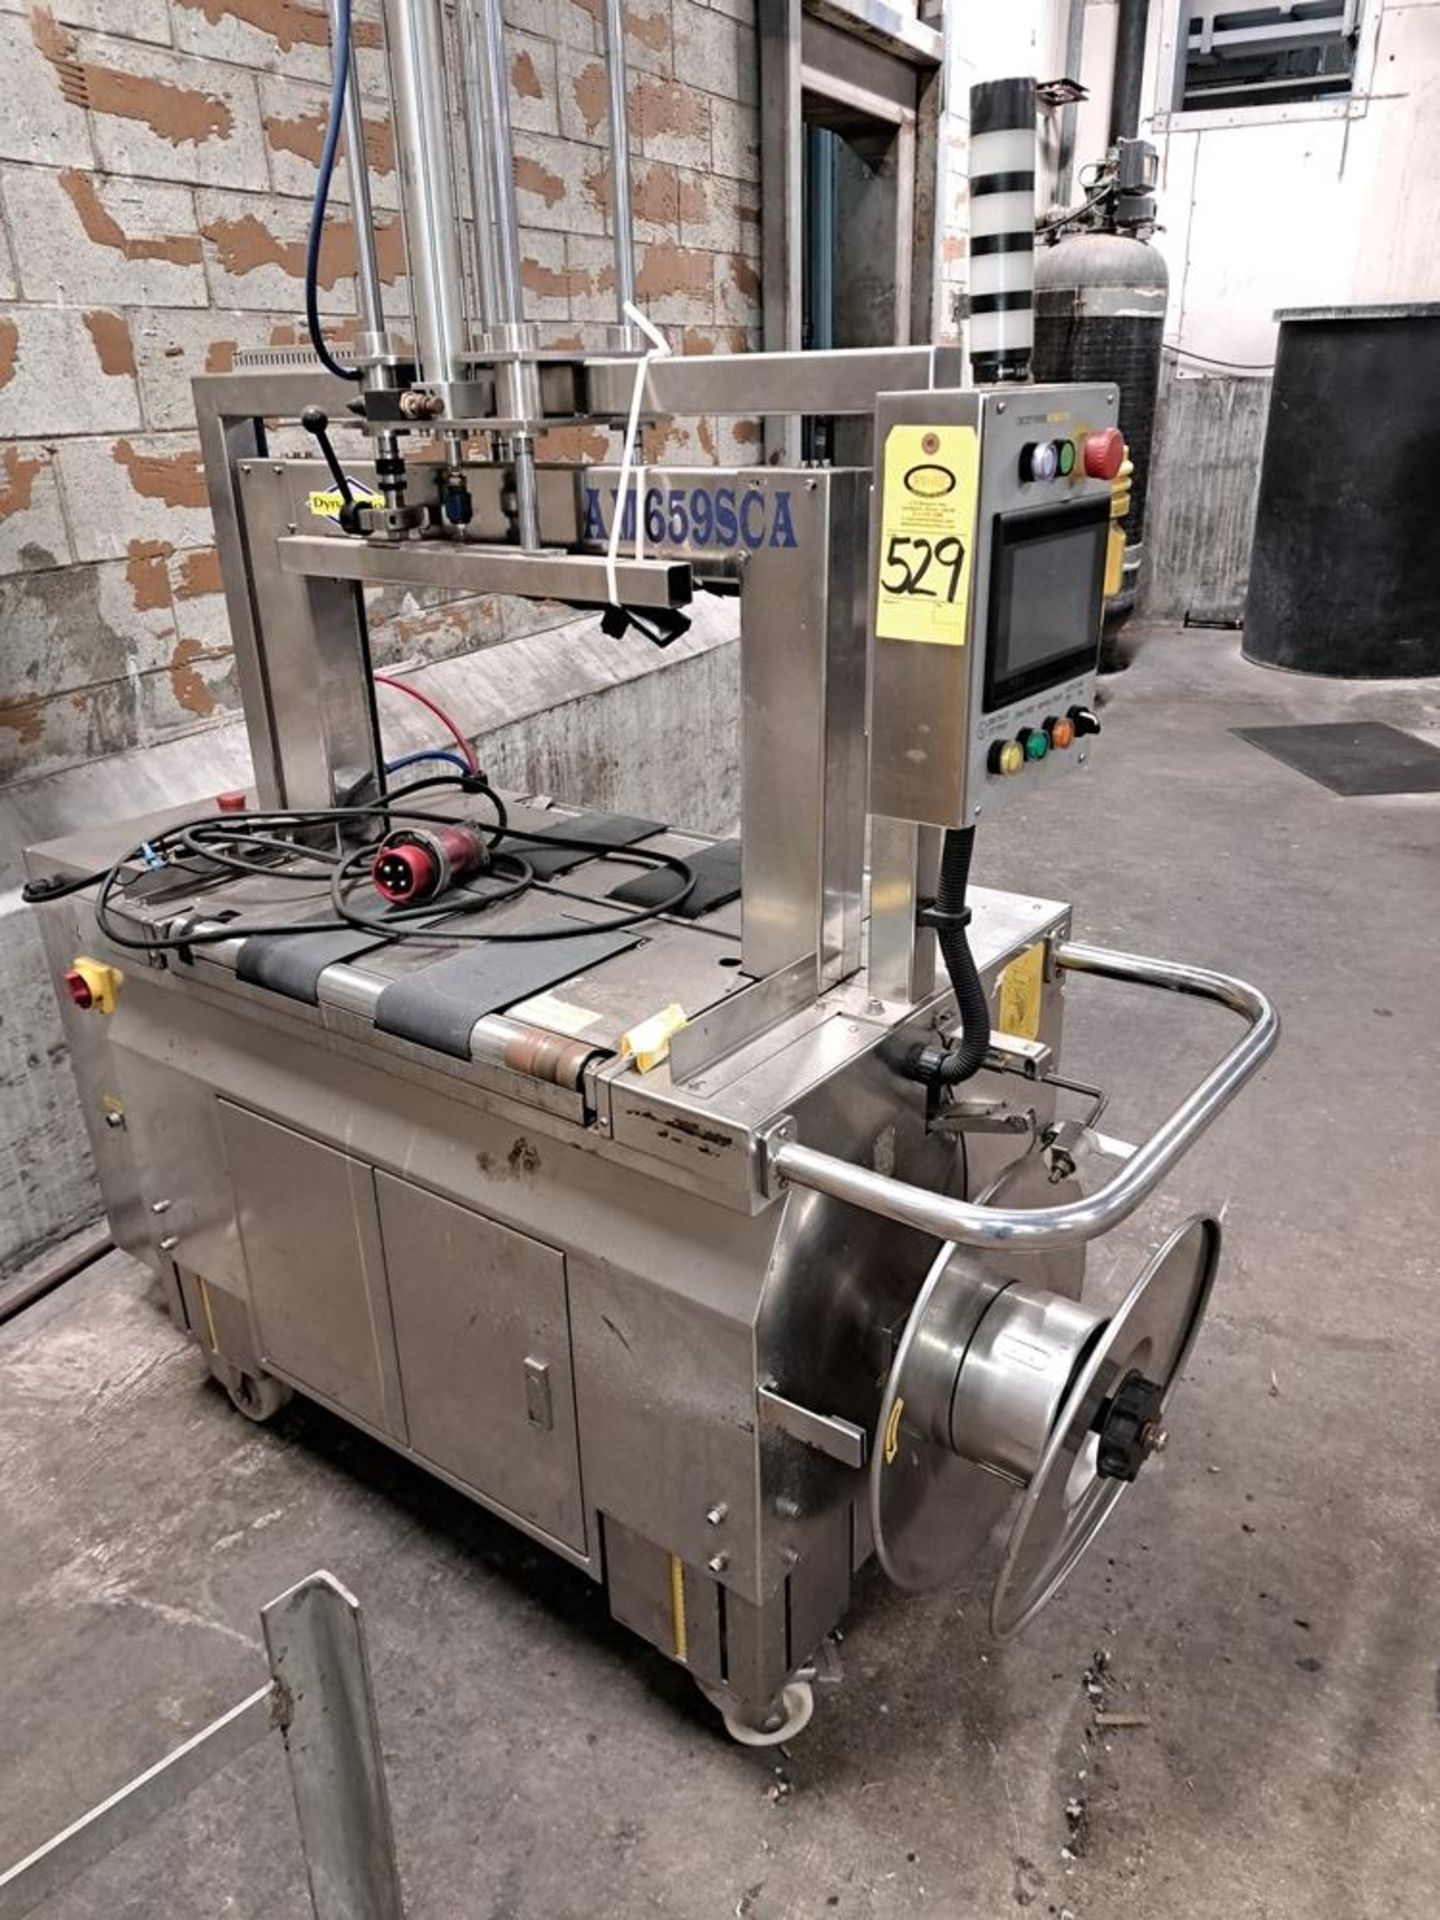 Dynaric Mdl. AM659SCA Stainless Steel Box Strapper, Ser. #201809014, 460 volts: Required Loading Fee